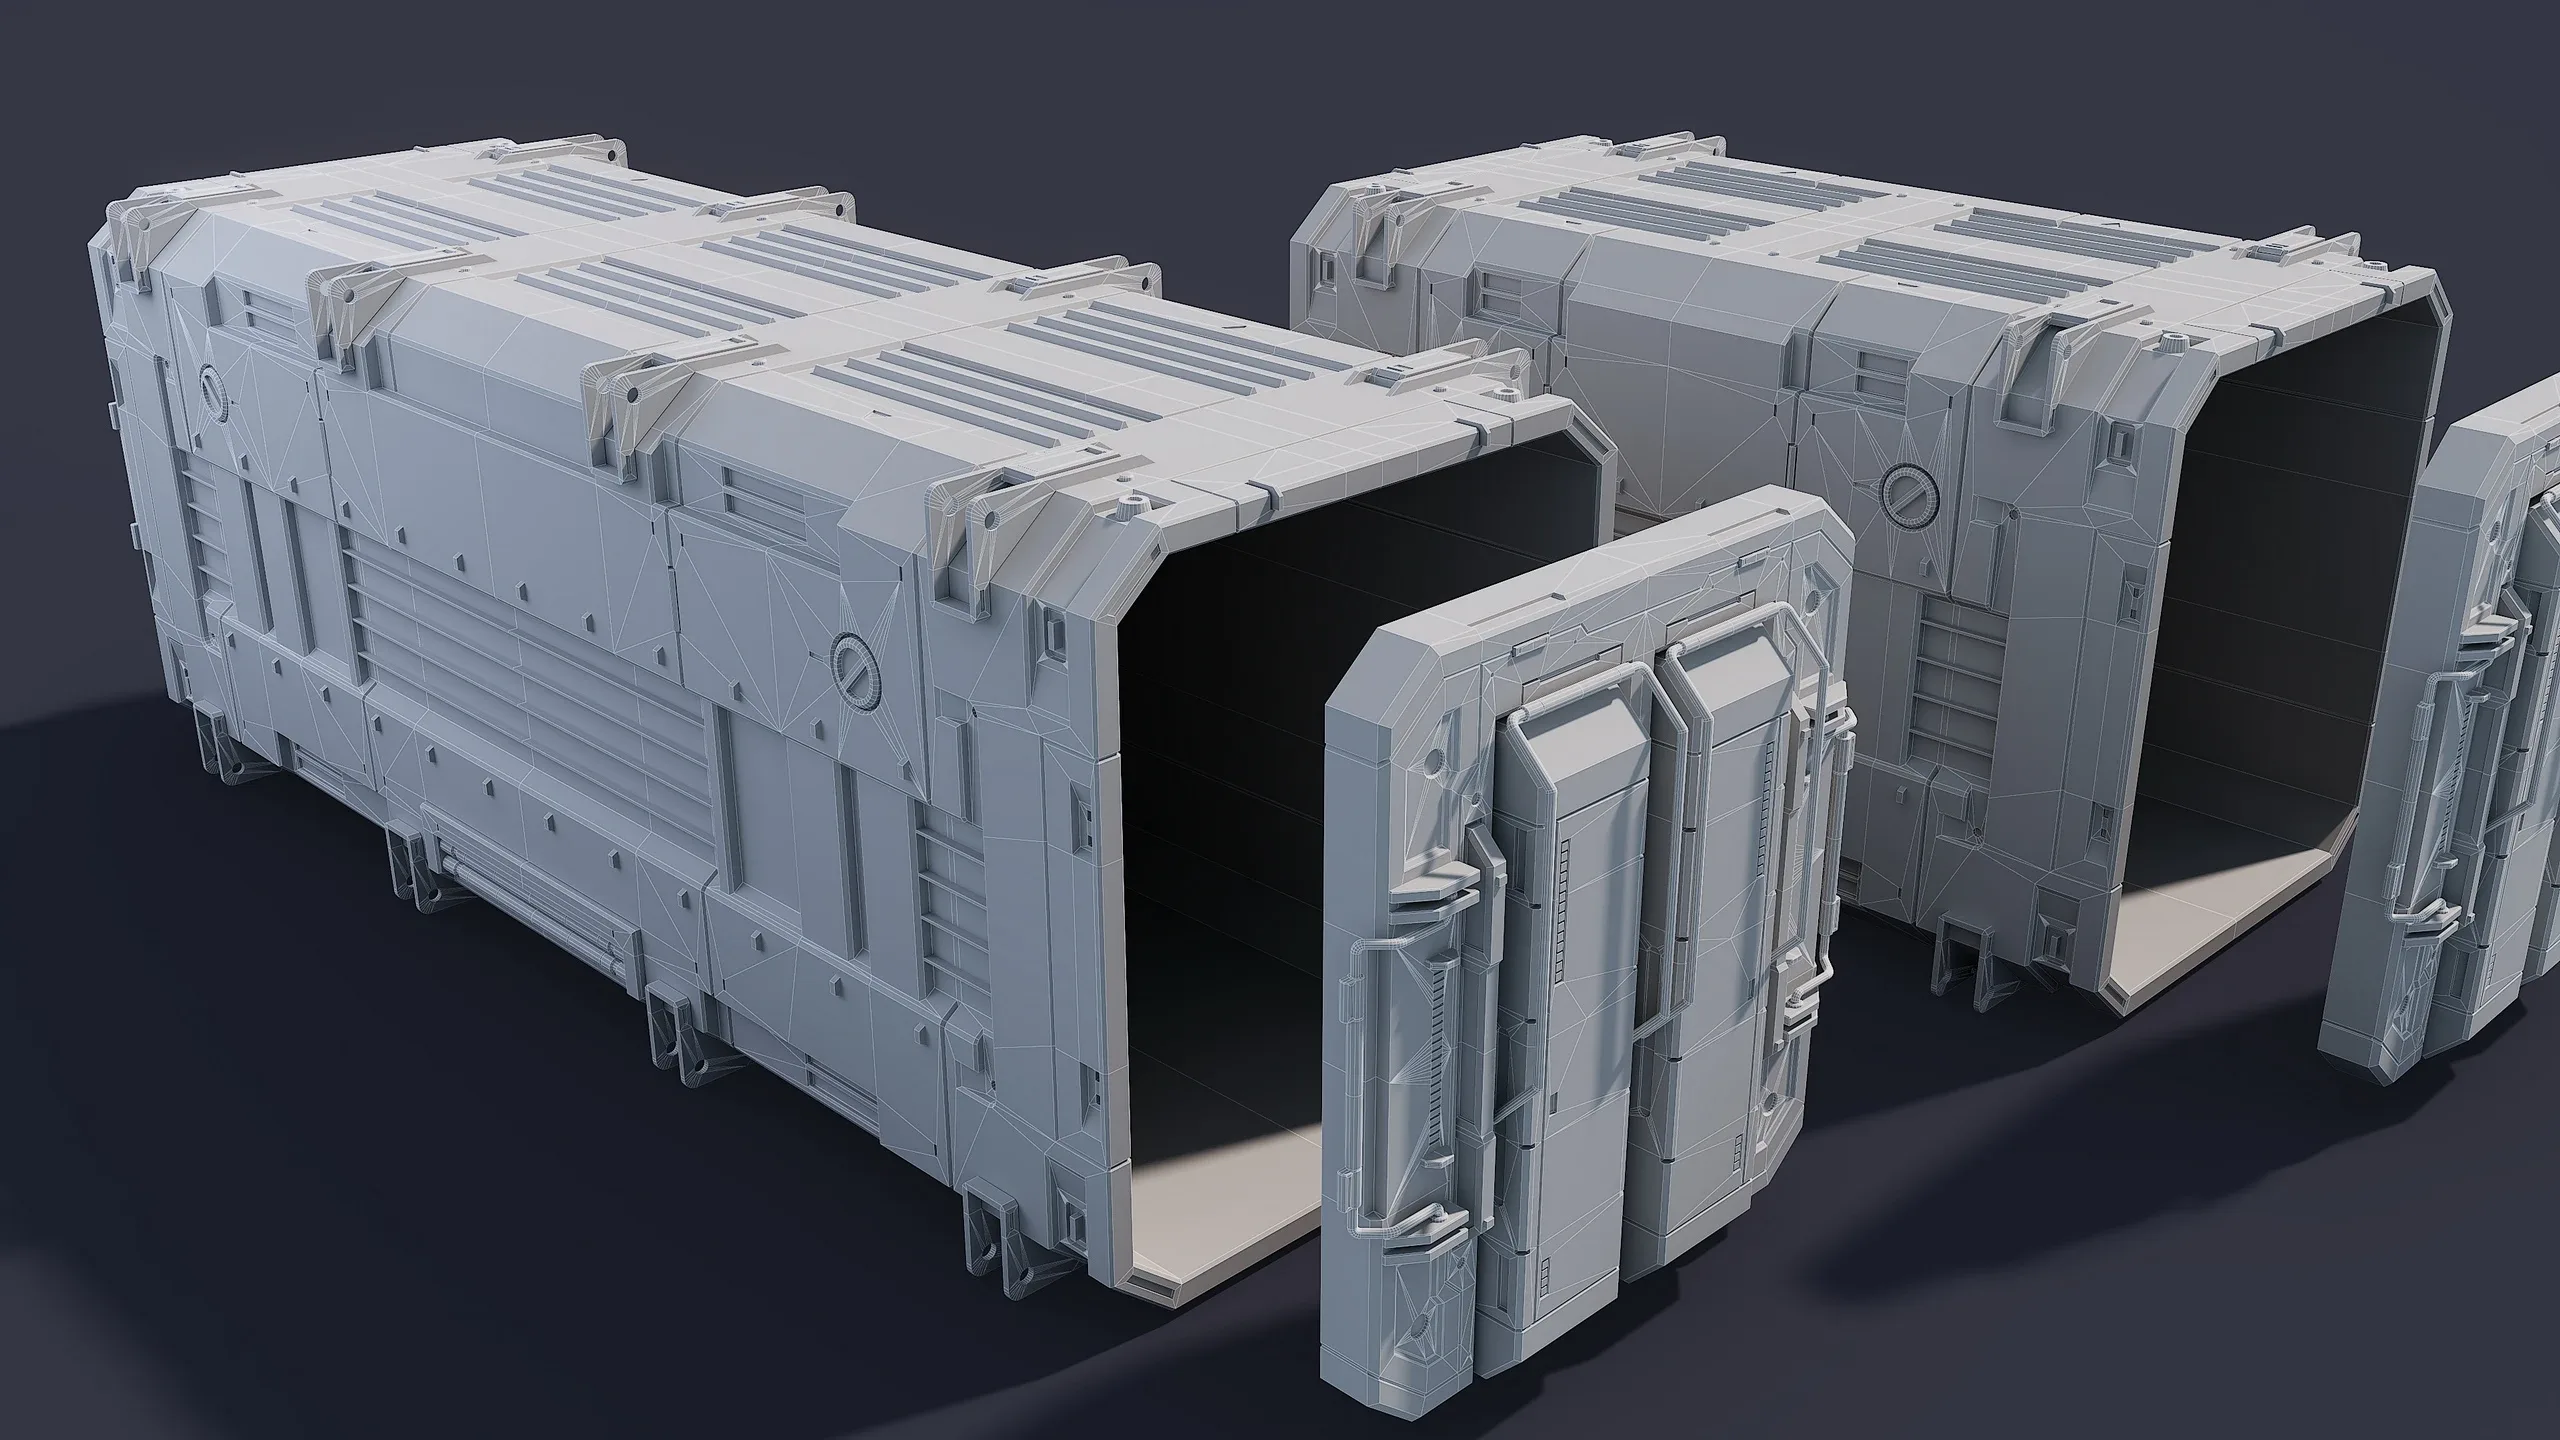 Sci-Fi Parts Kit Pack Vol 05 Container